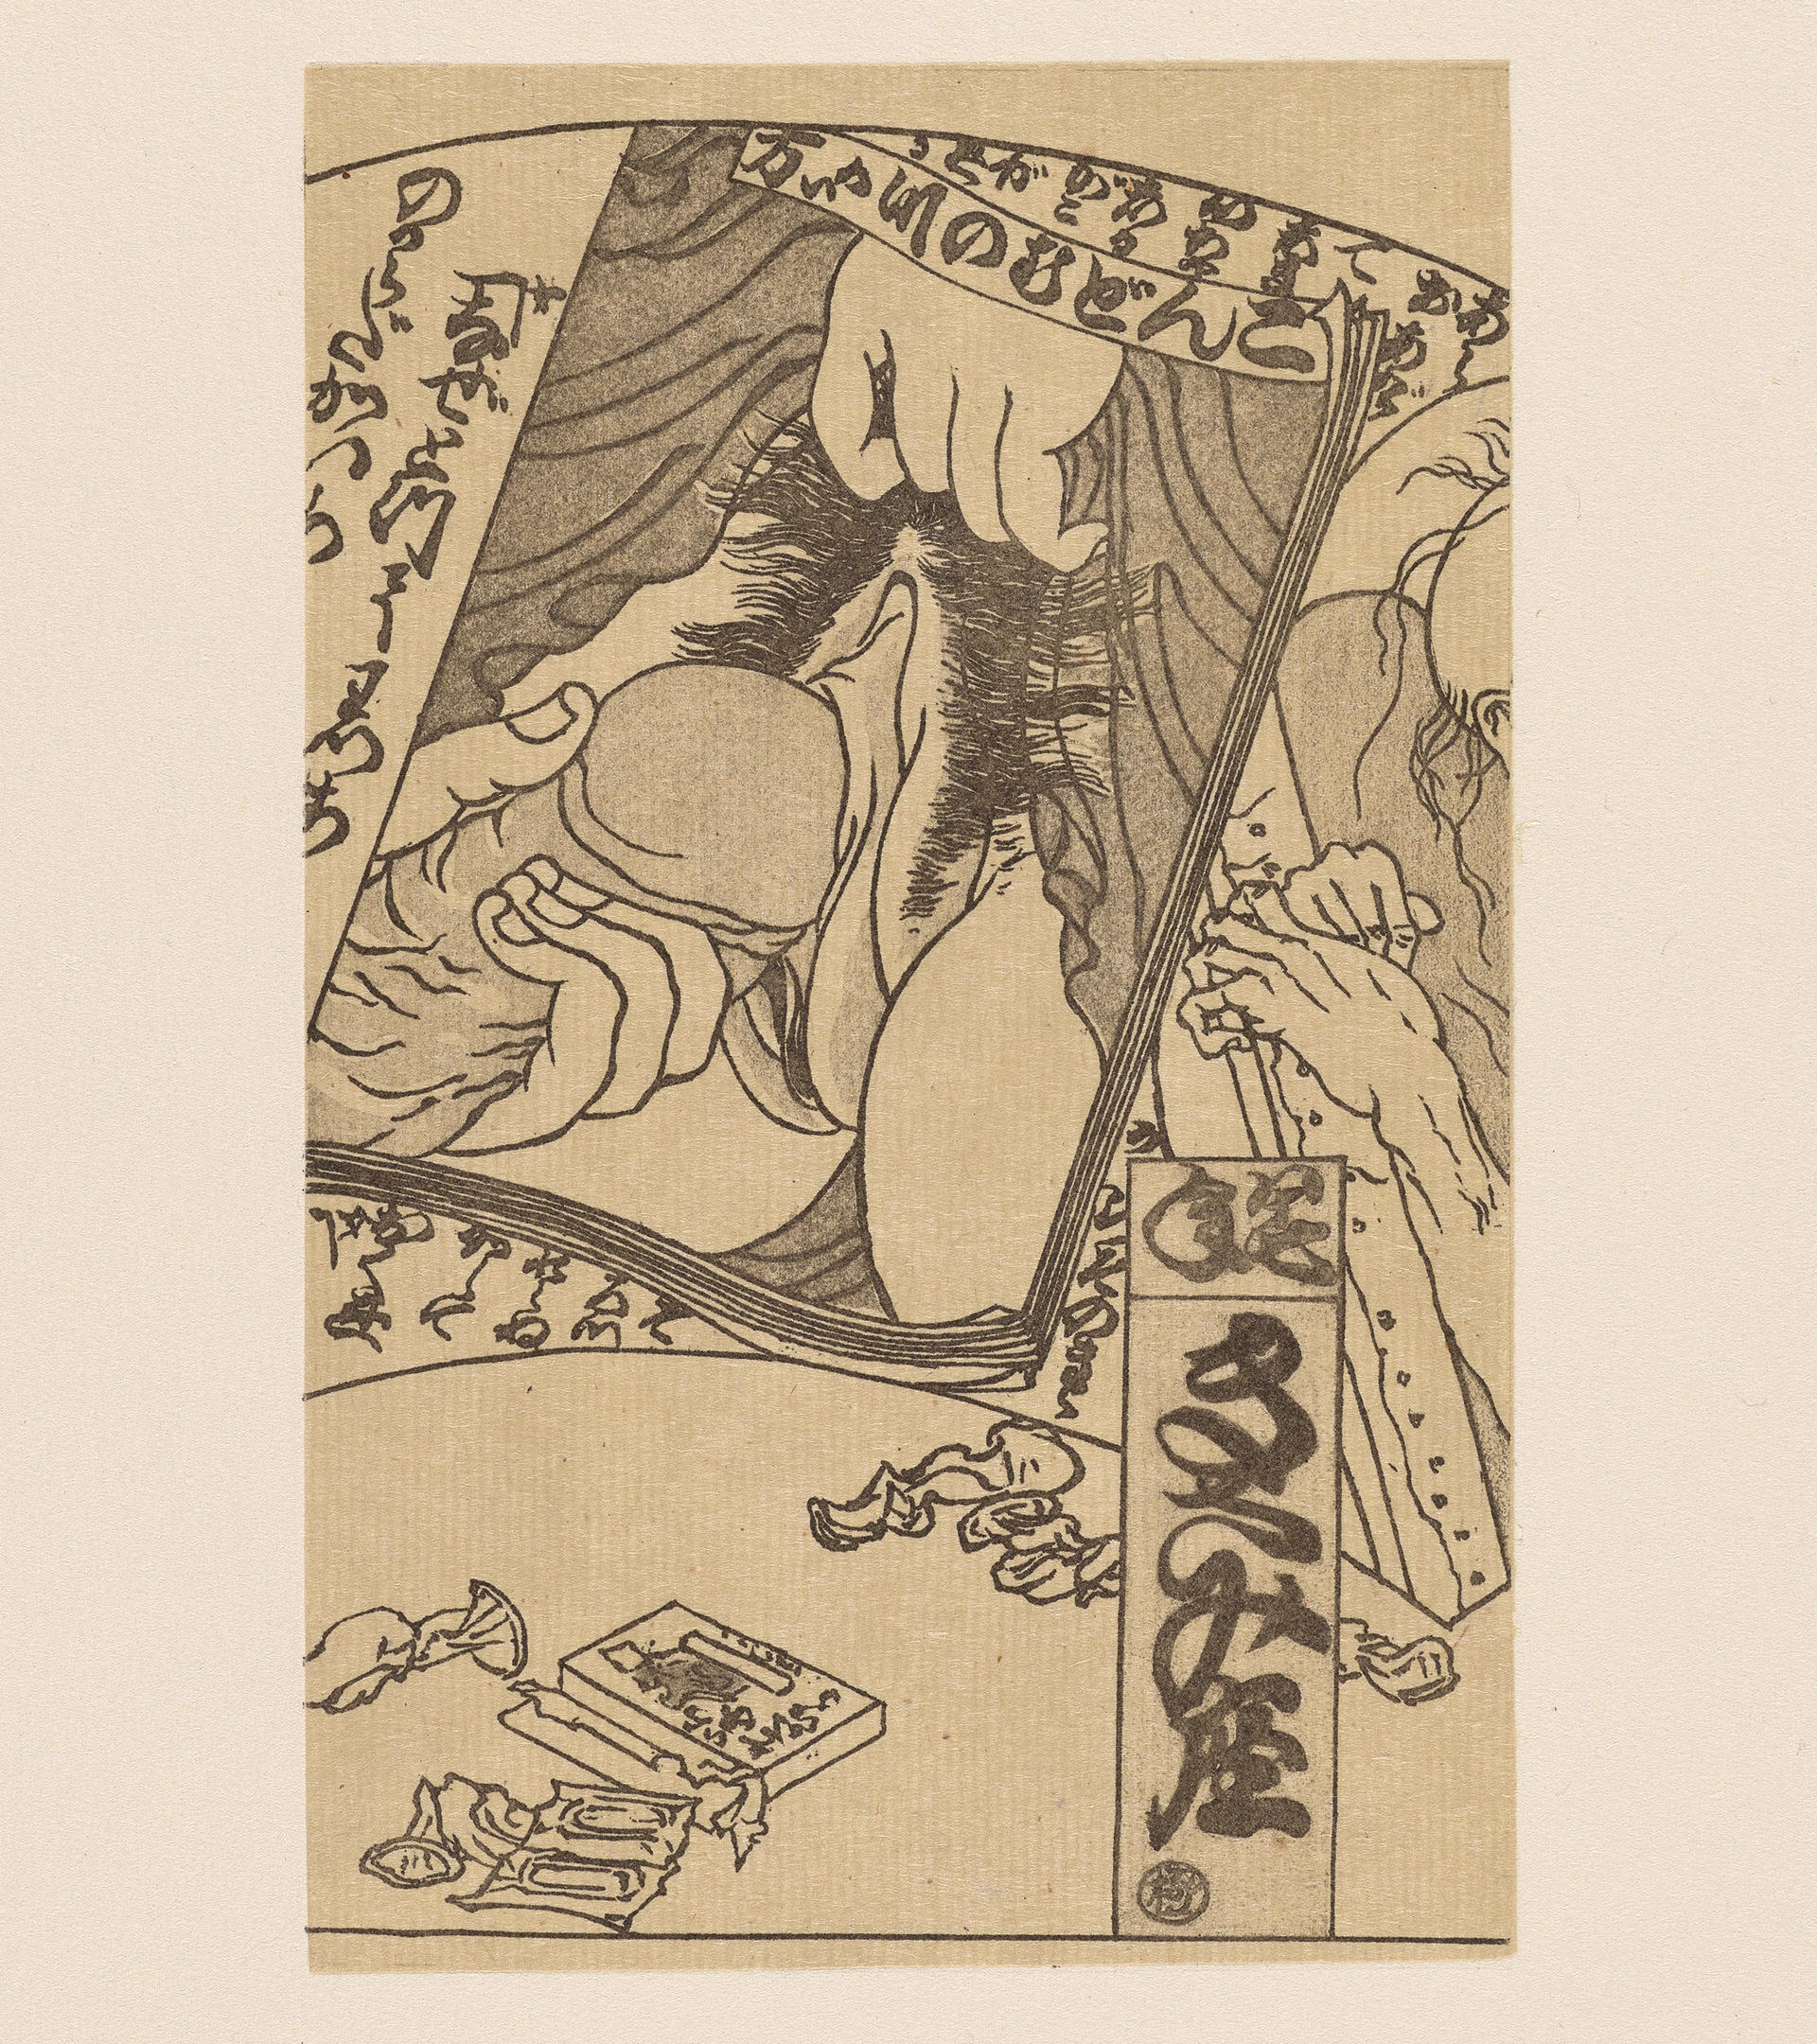 A traditional, Japanese-style print of a magazine cover that depicts a hand inserting a large penis into a hairy vagina. A condom box and used condoms lay sprawled below.